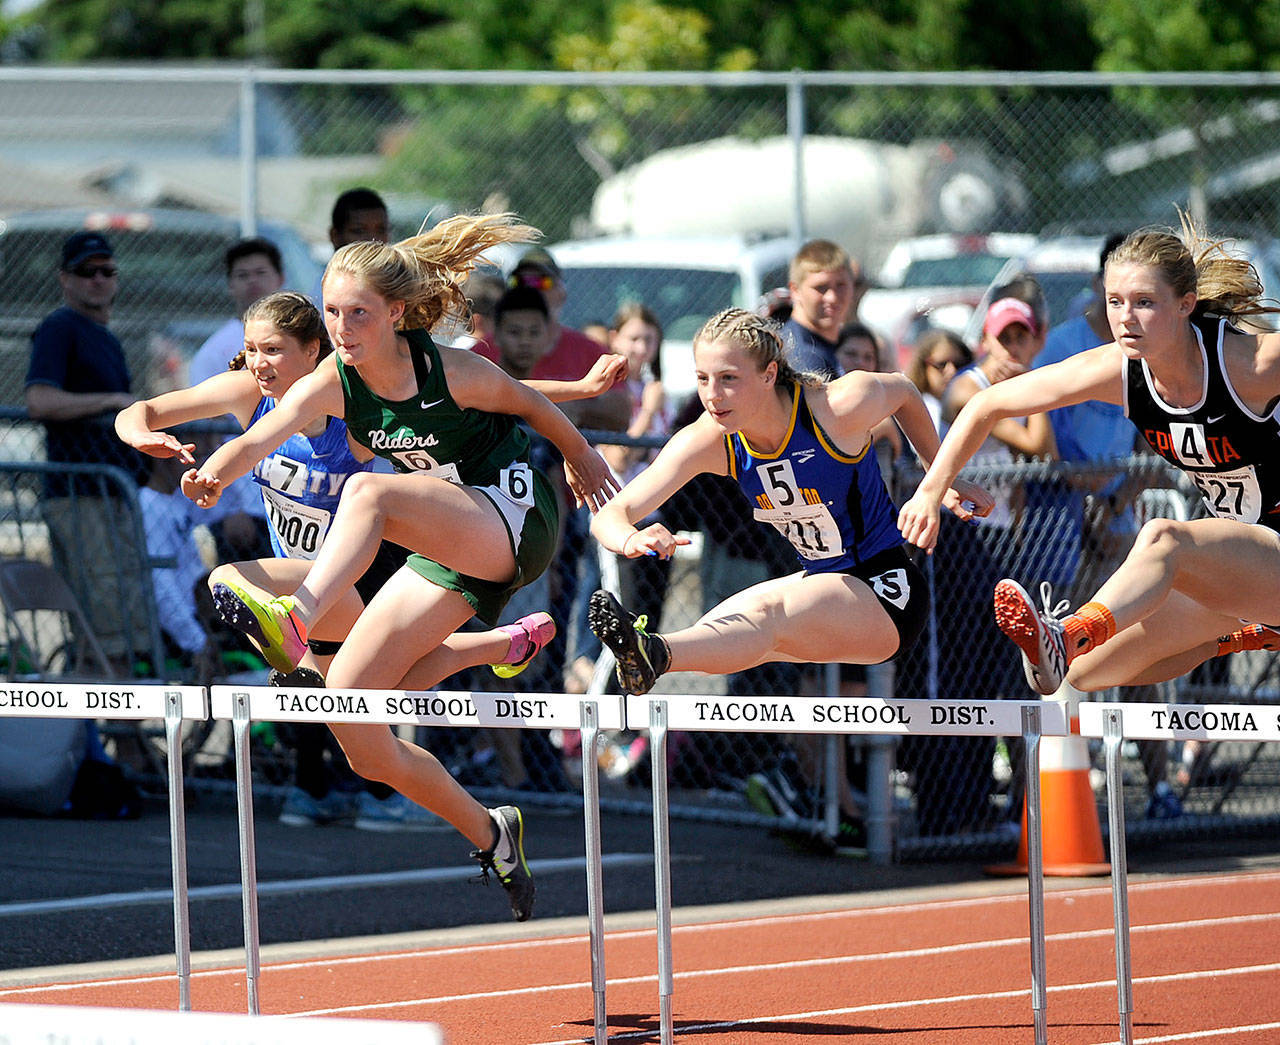 Port Angeles’ Millie Long competes in the 100-meter hurdles at the 2A state track and field championships in 2018. Long didn’t place in 2018 in the 100 hurdles, but finished seventh in this event and first in the 300-meter hurdles at state this spring. (Michael Dashiell/Olympic Peninsula News Group)